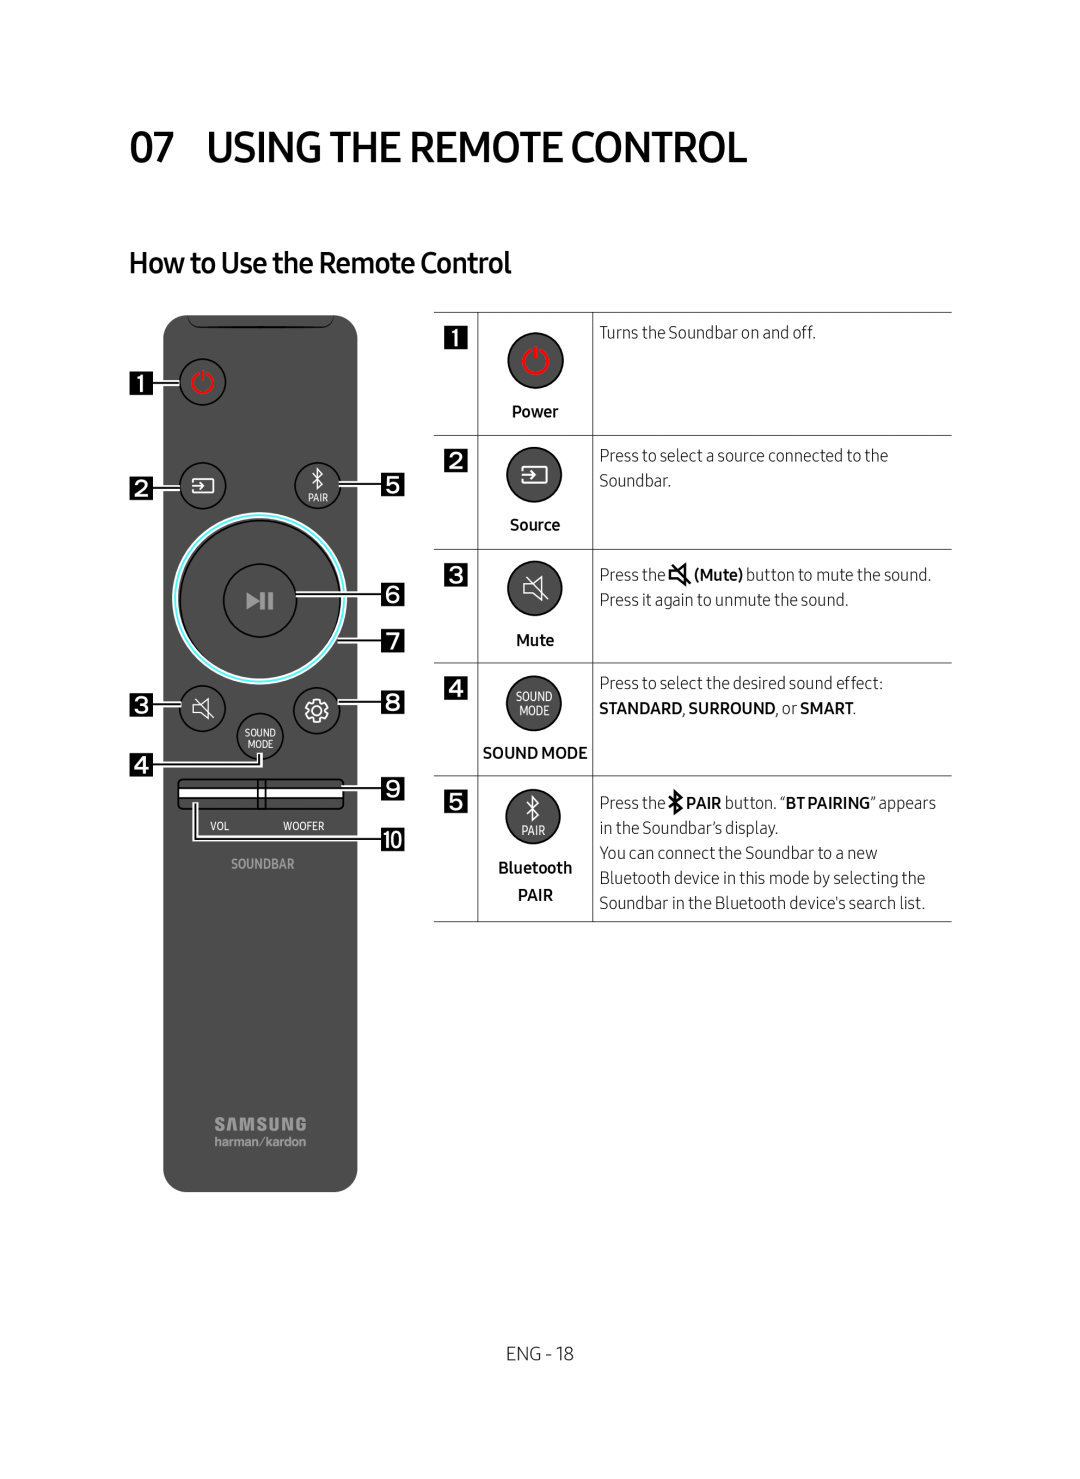 How to Use the Remote Control 07 USING THE REMOTE CONTROL